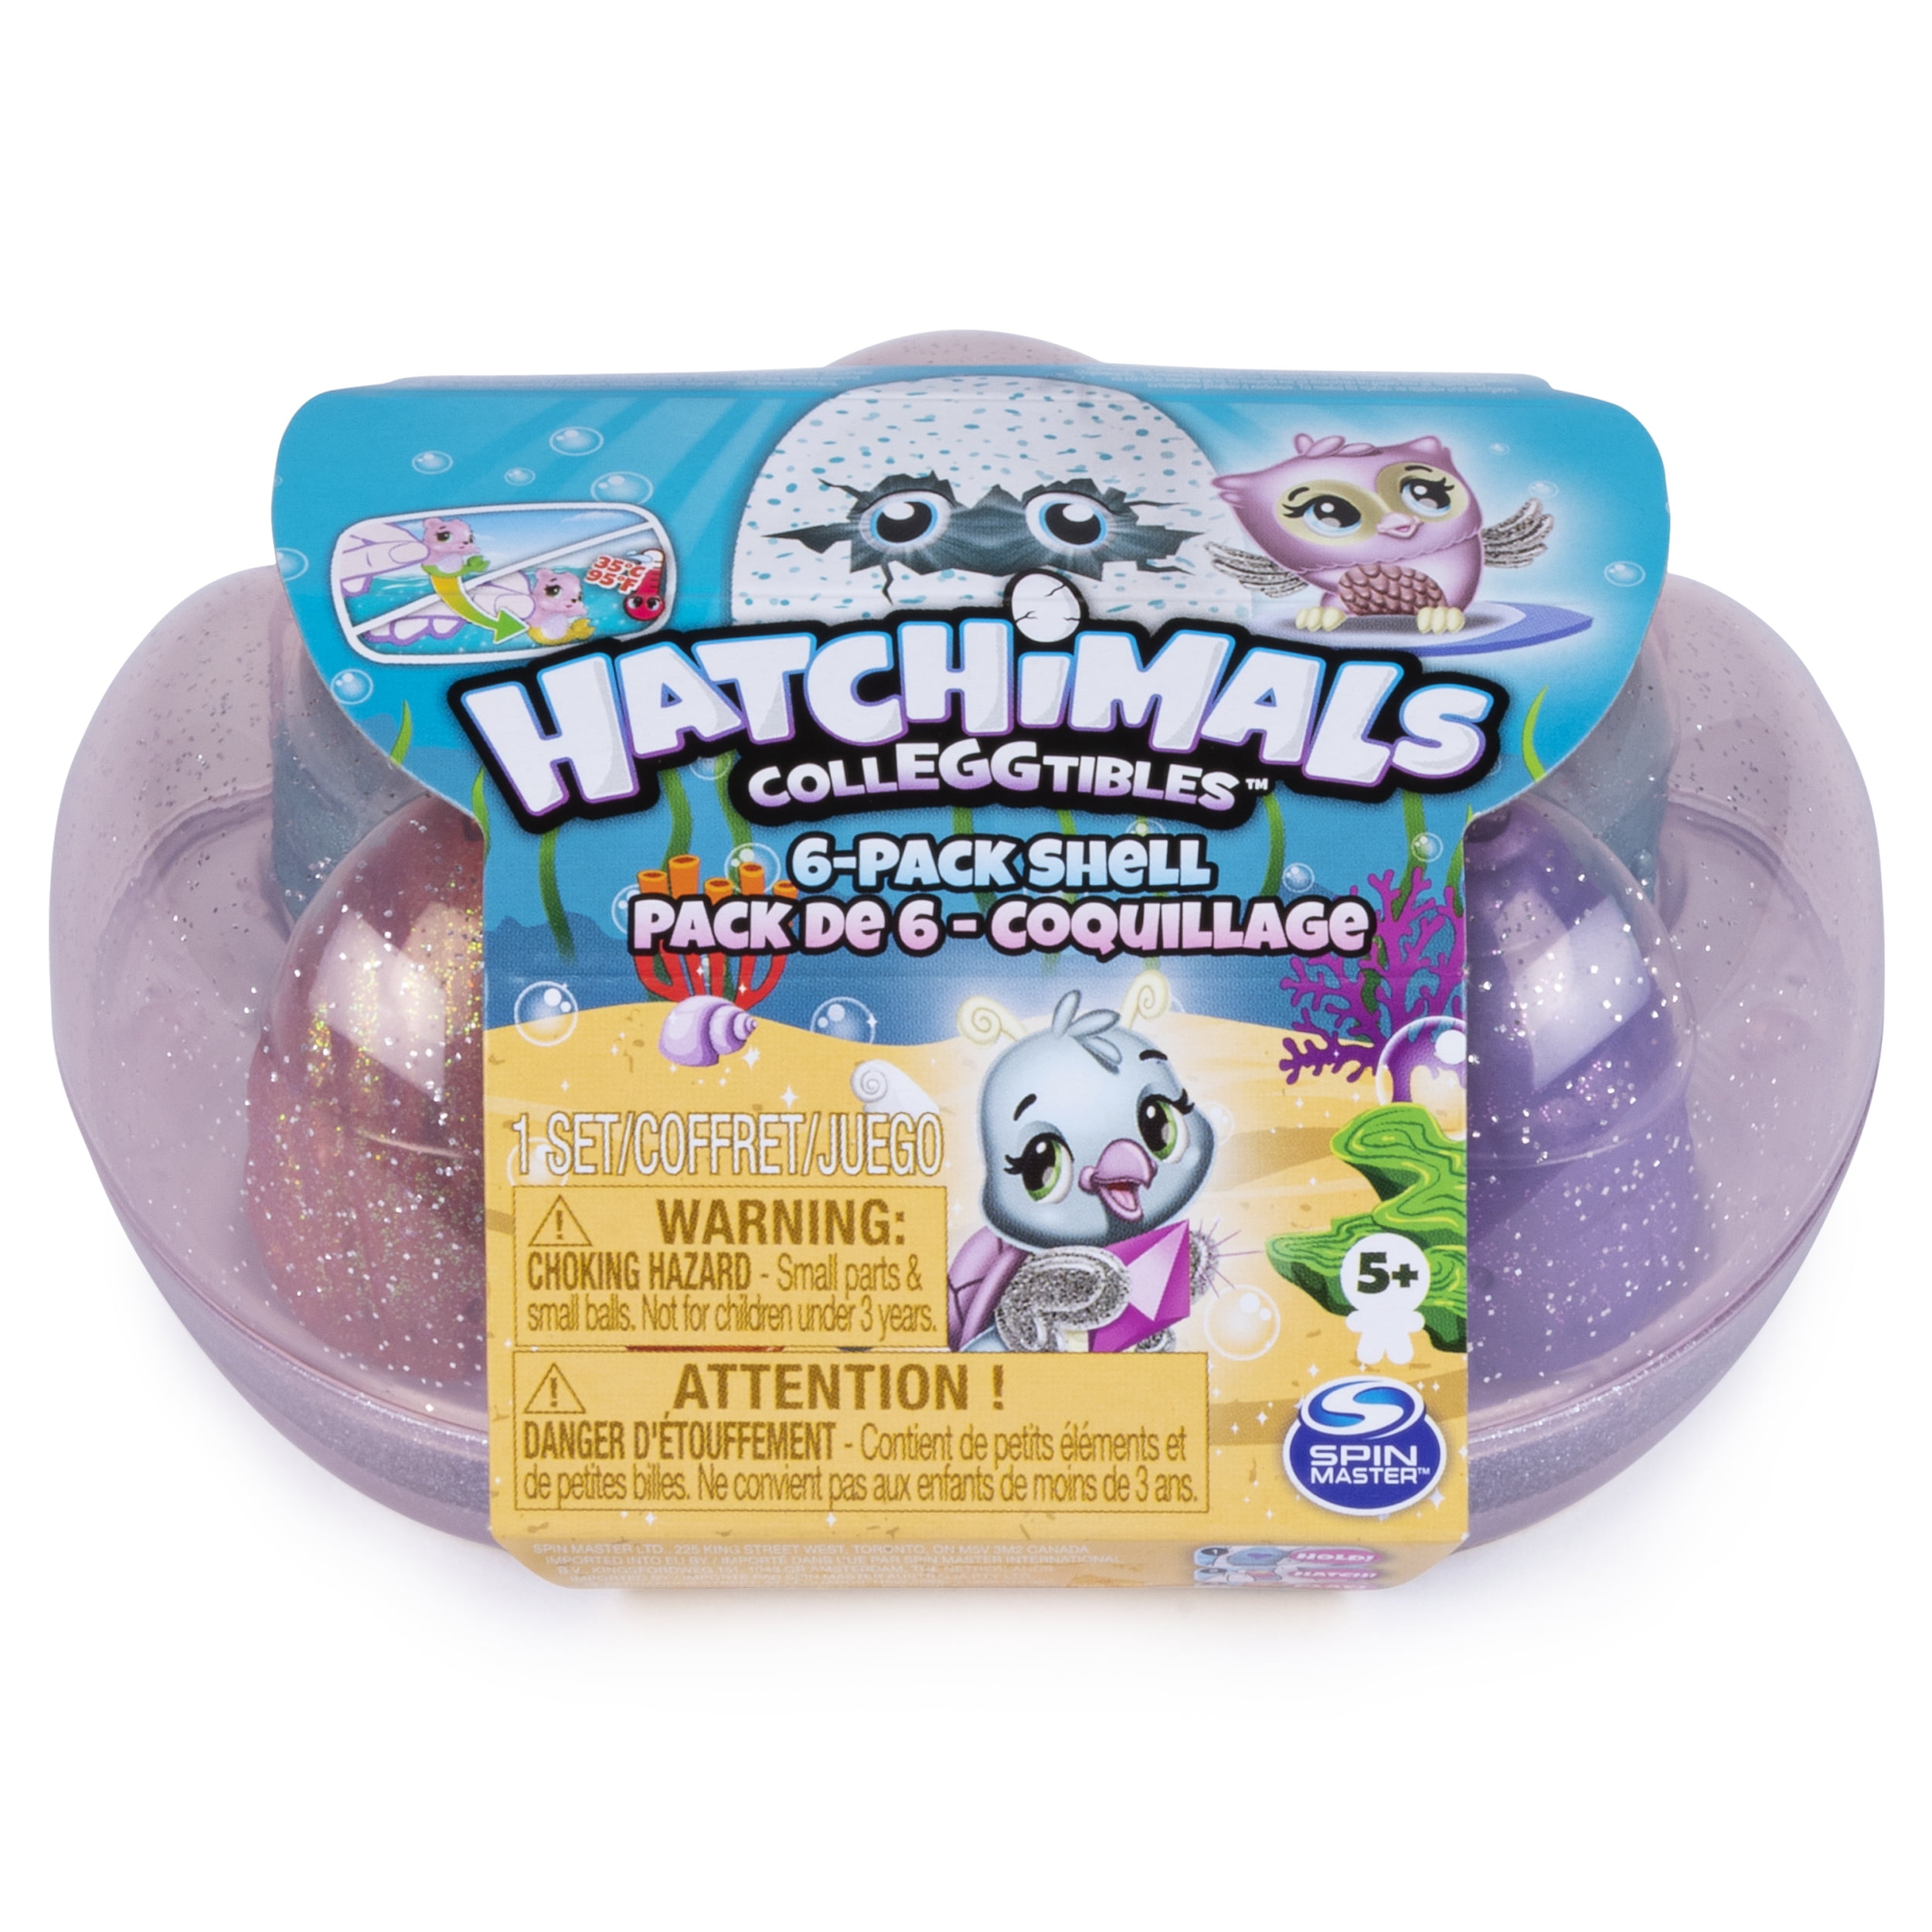 Hatch and Seek 6 Pack Easter Egg Carton with Hatchim.. Hatchimals CollEGGtibles 